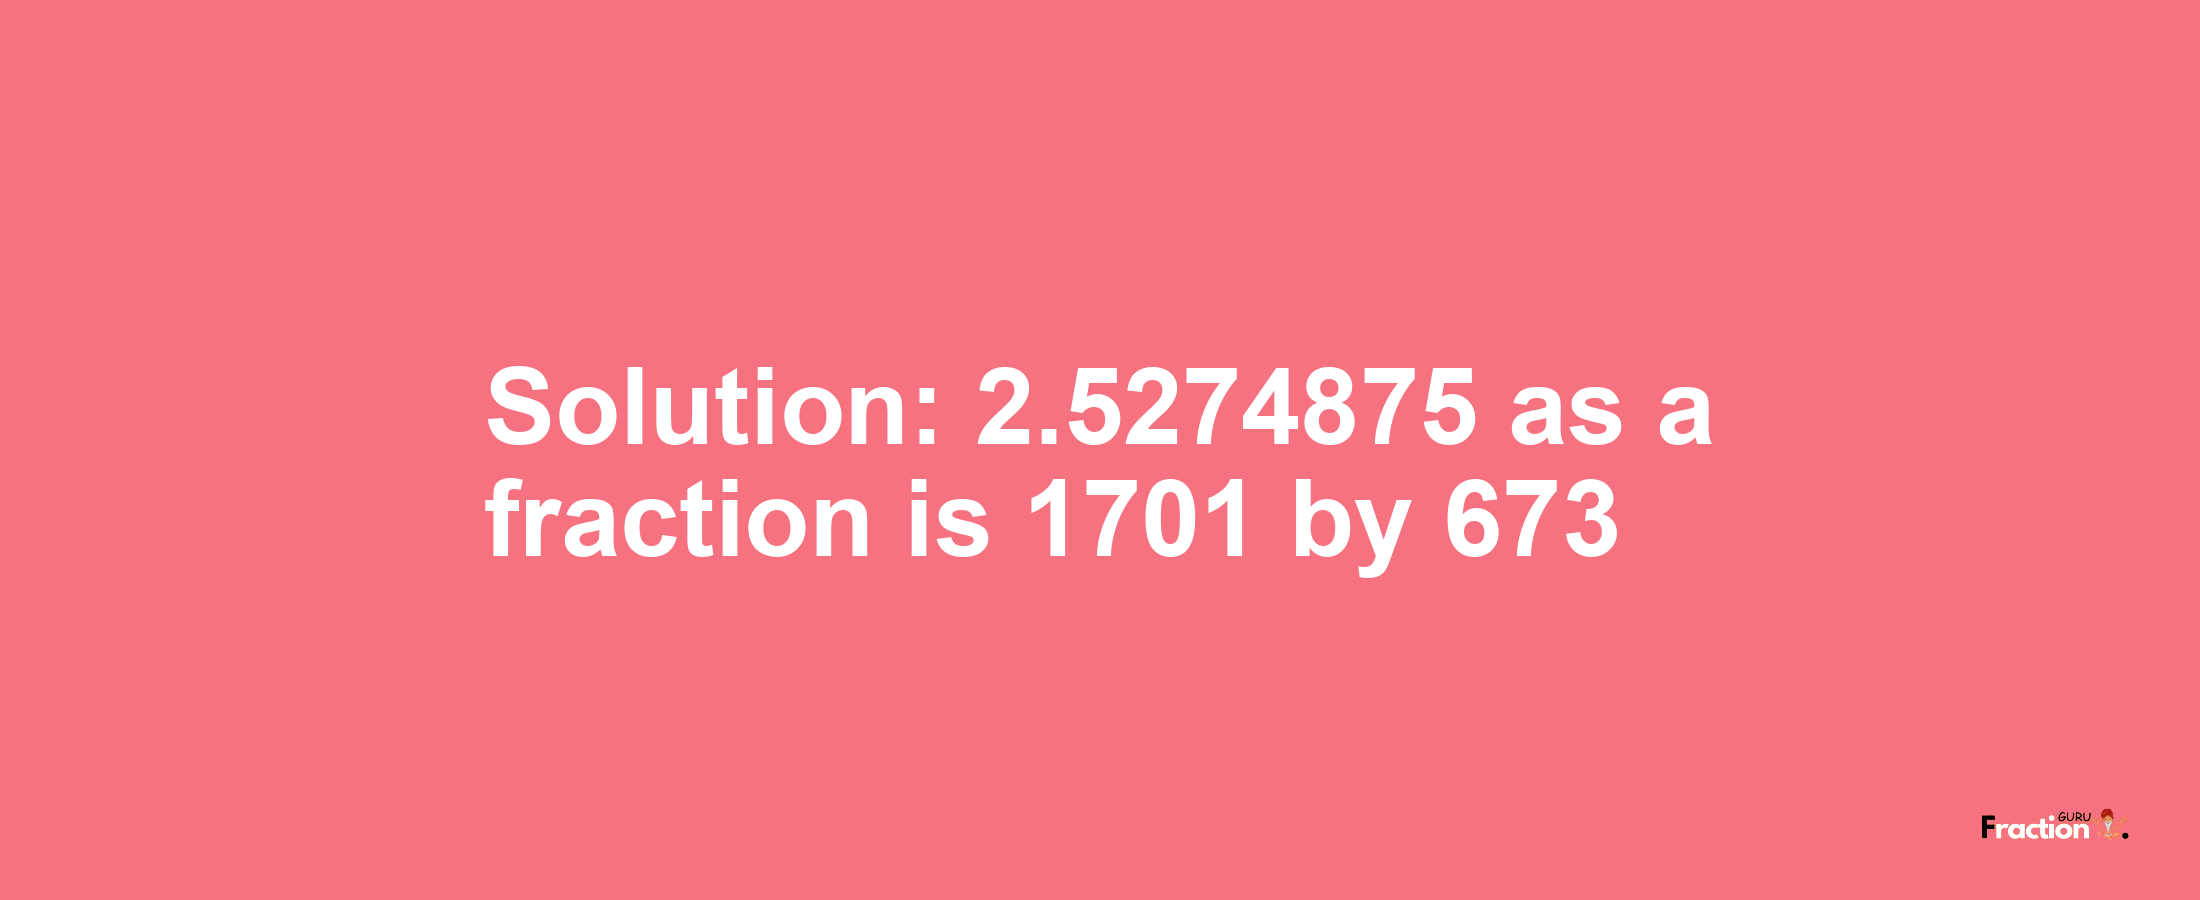 Solution:2.5274875 as a fraction is 1701/673